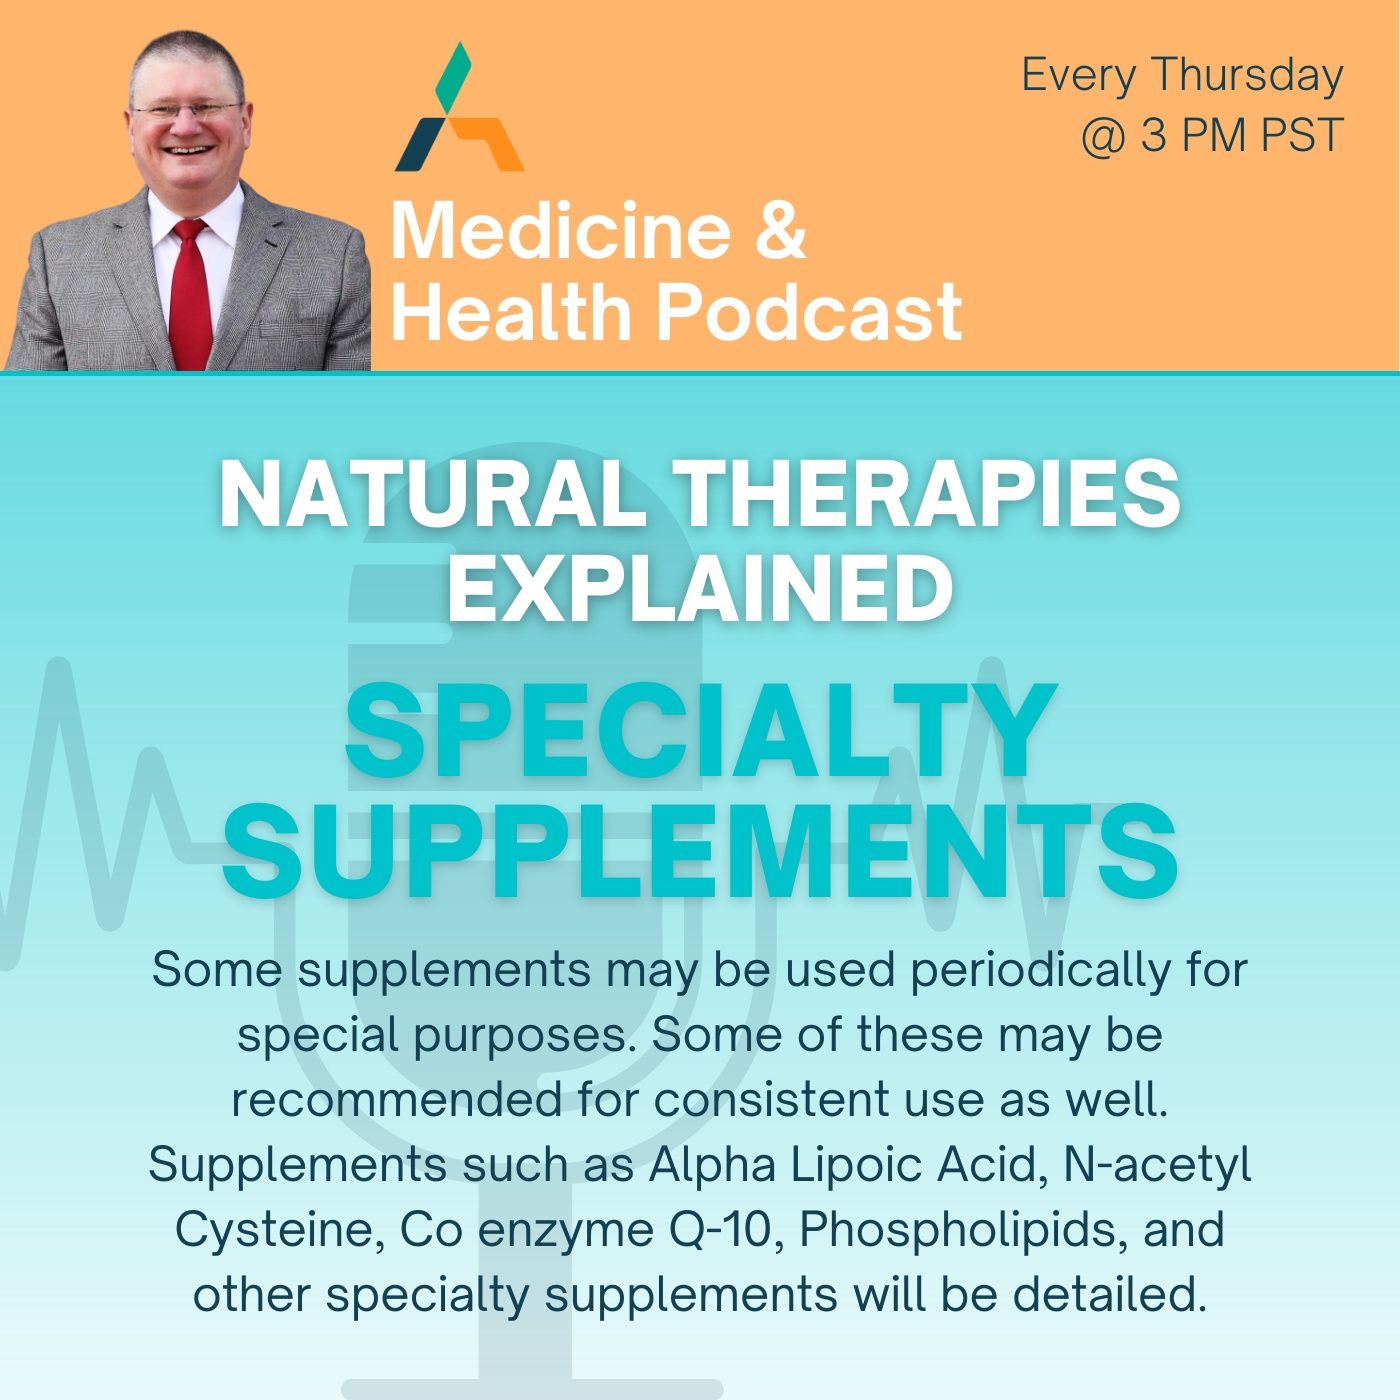 SPECIALTY SUPPLEMENTS (Helpful Therapies)